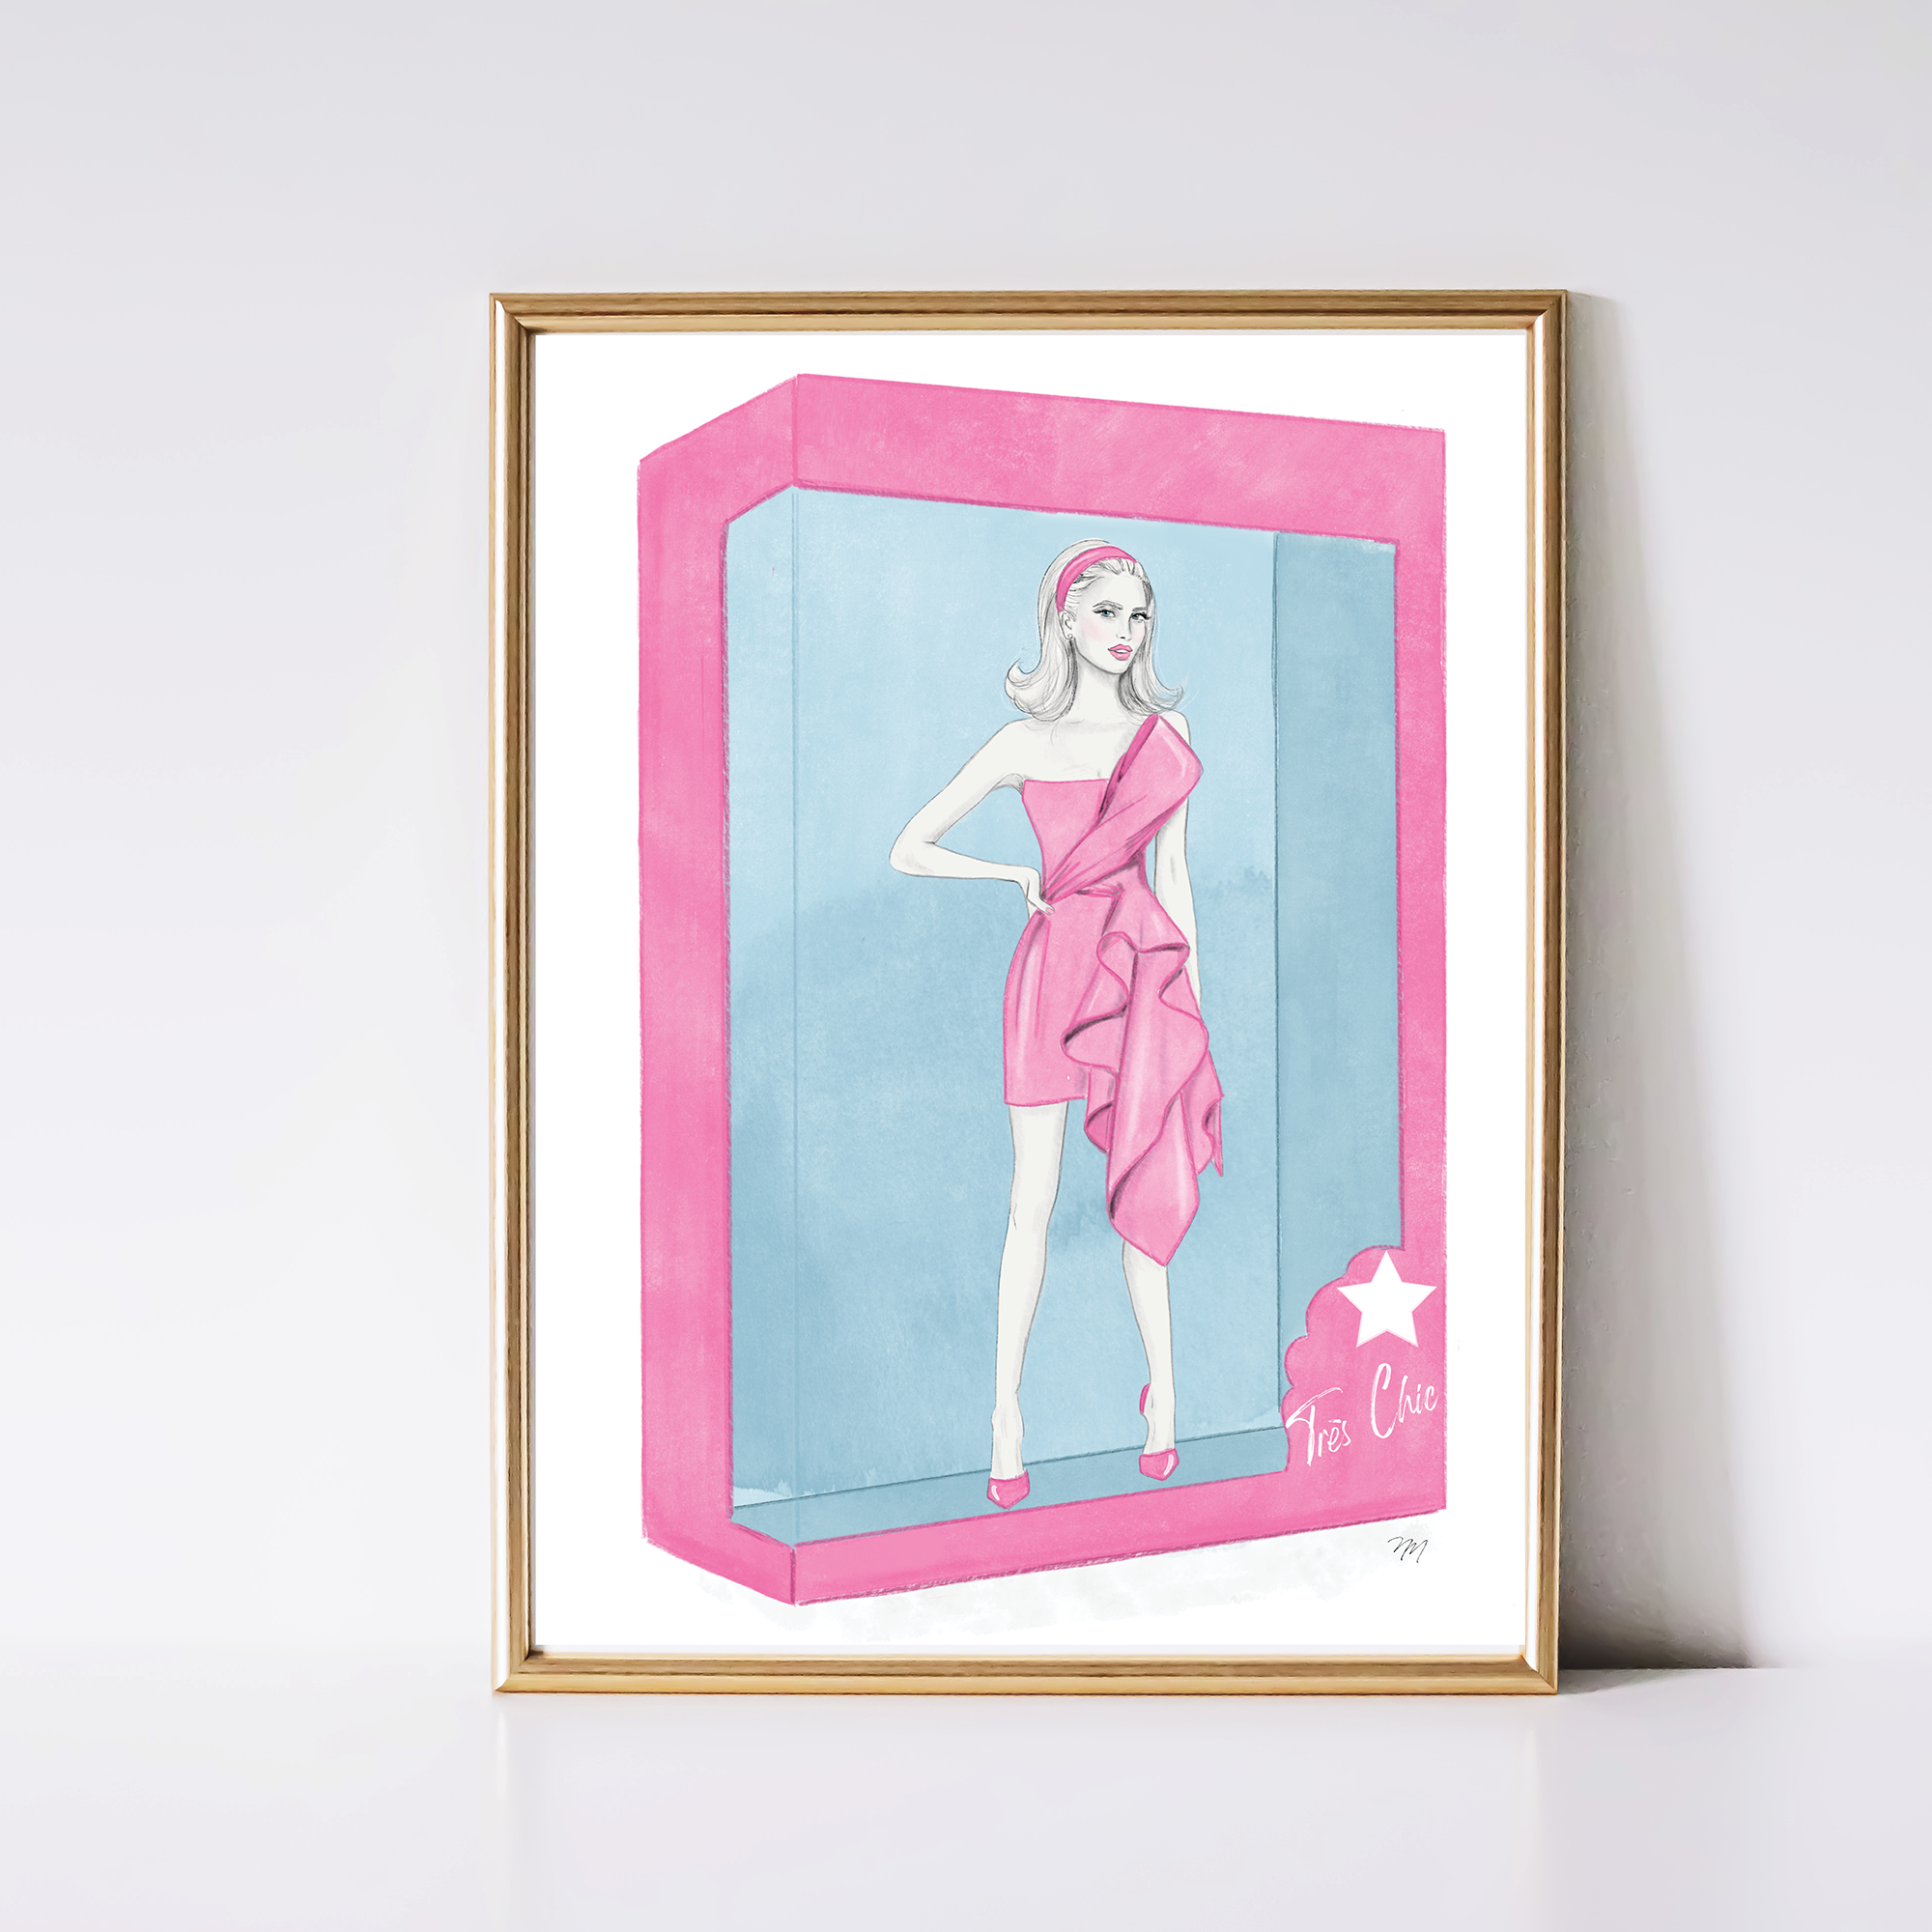 A whimsical and playful watercolor illustration by artist Nina Maric of a Barbie-inspired figure in a playful pose, surrounded by vibrant pink and blue hues. The illustration captures the playful spirit of childhood memories and adds a pop of color to any room.